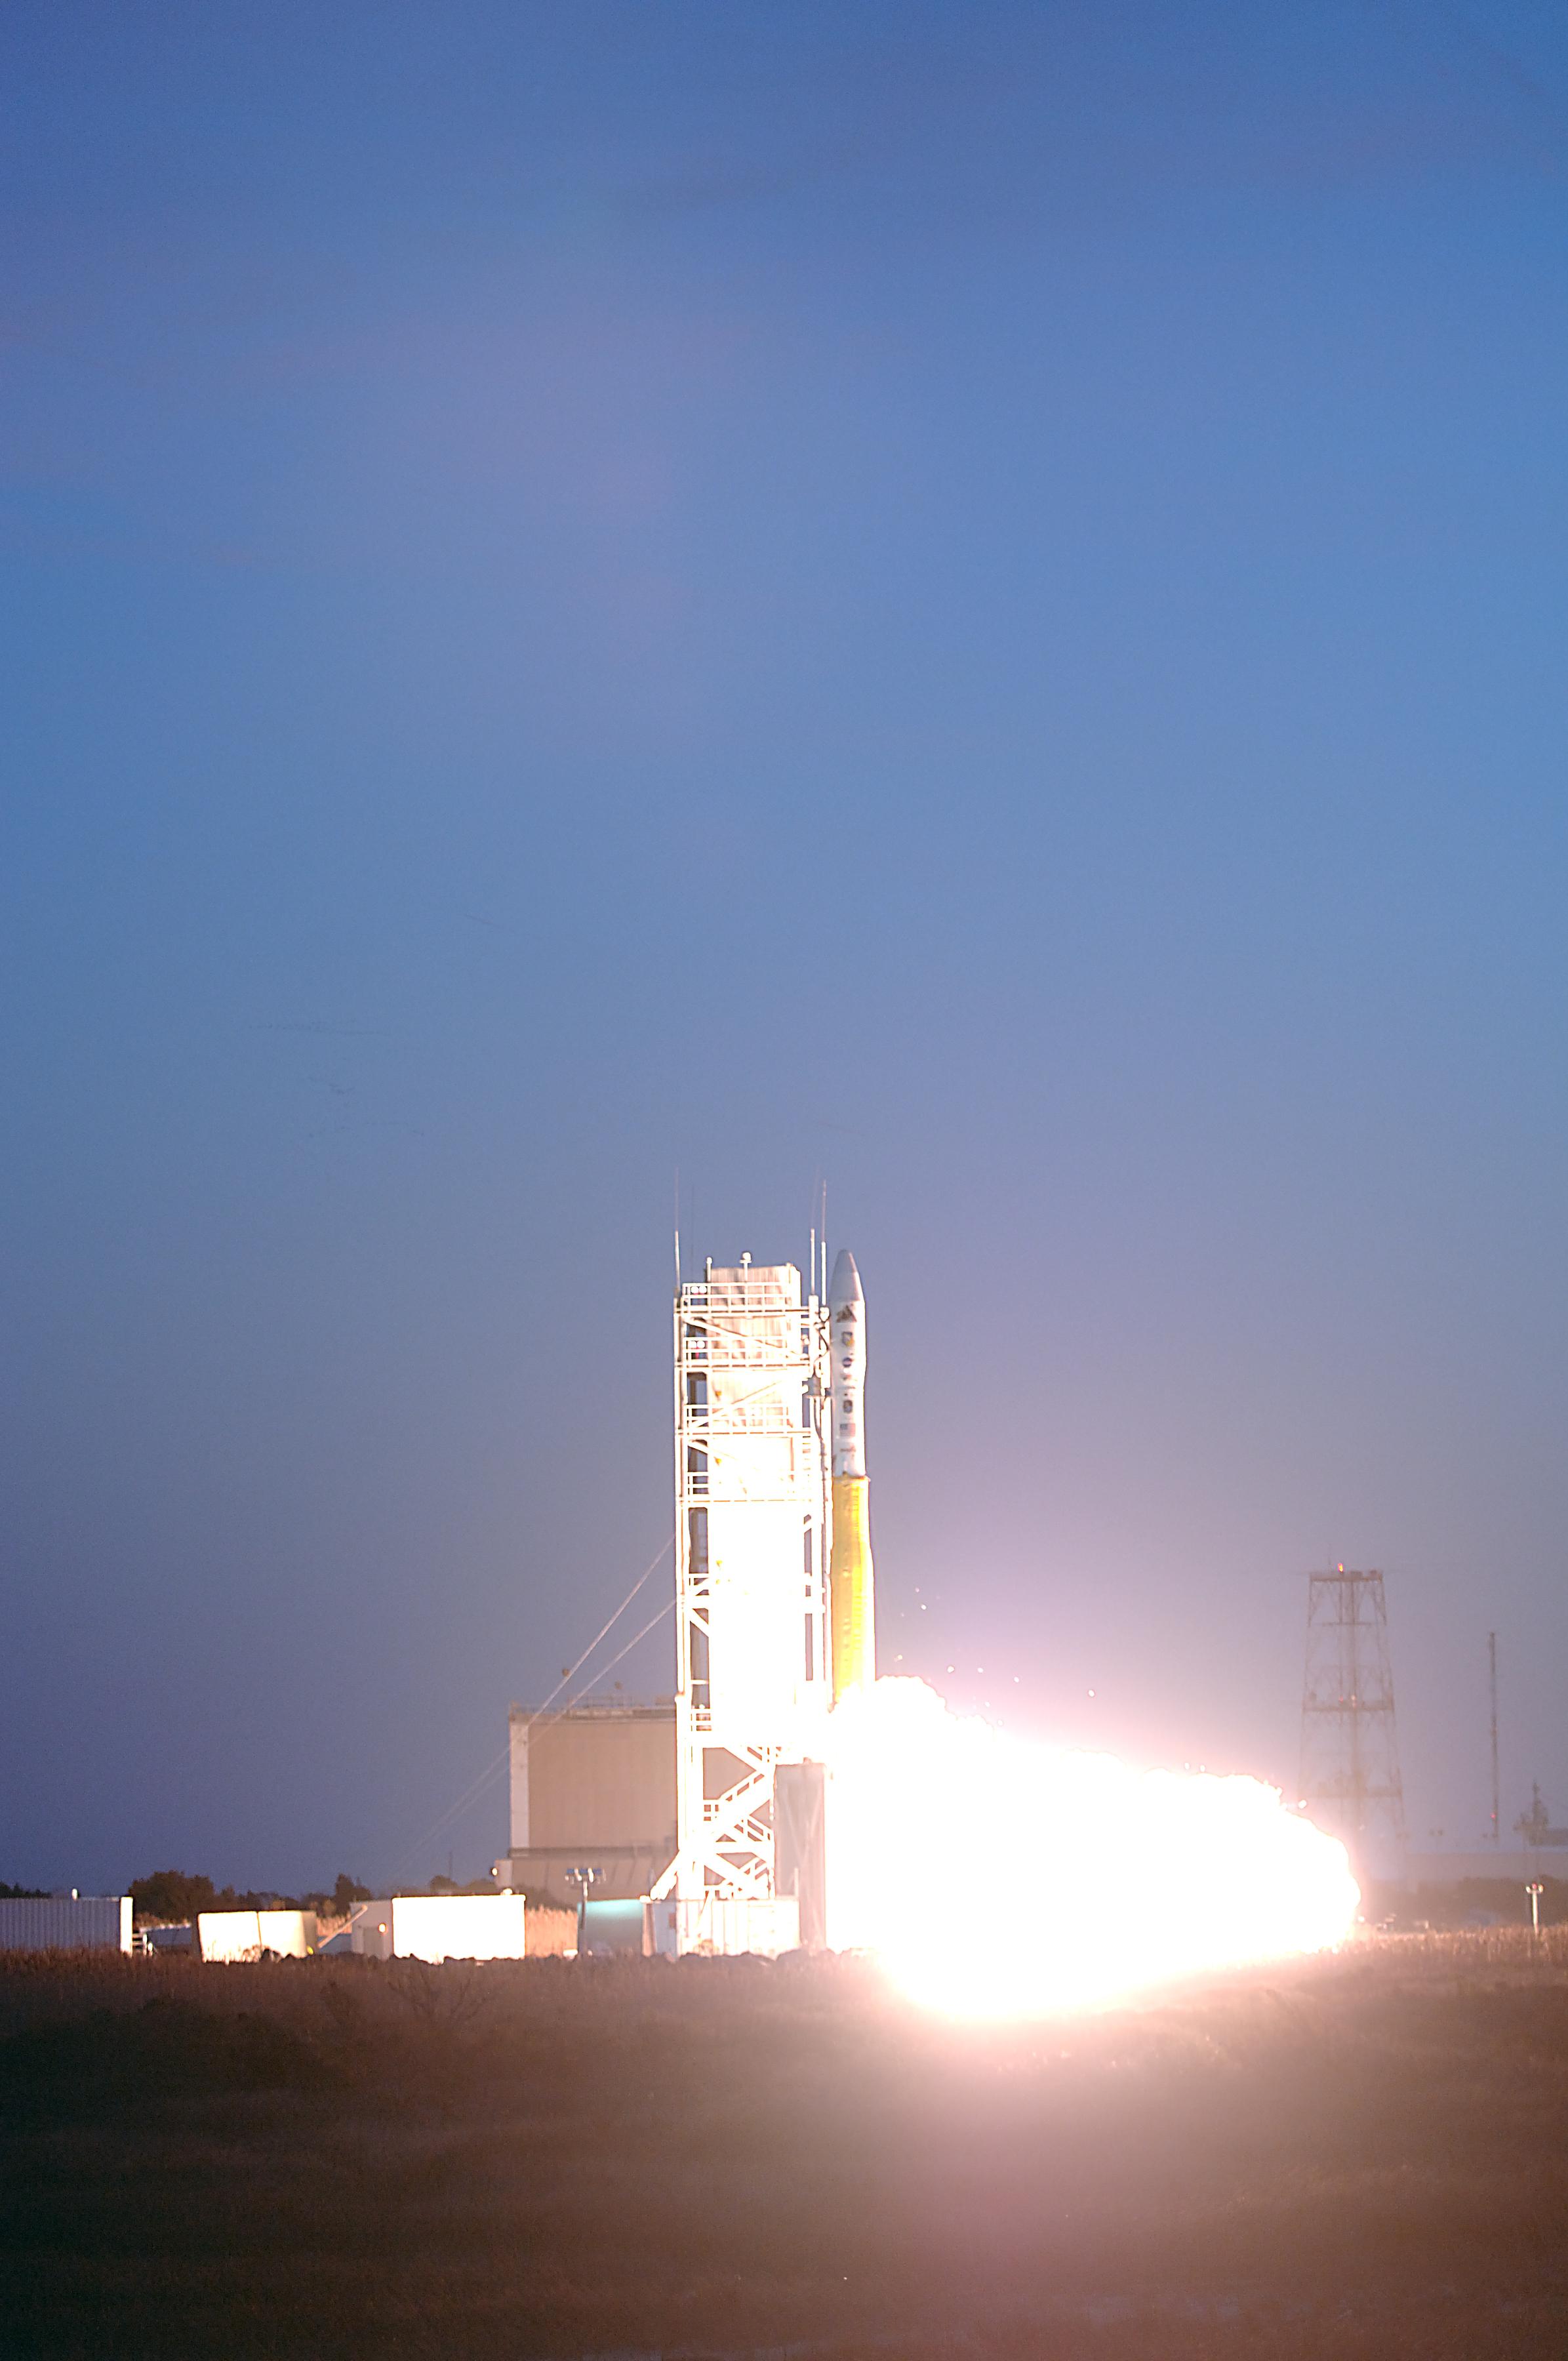 Minotaur ignition with TacSat-2 and GeneSat 1